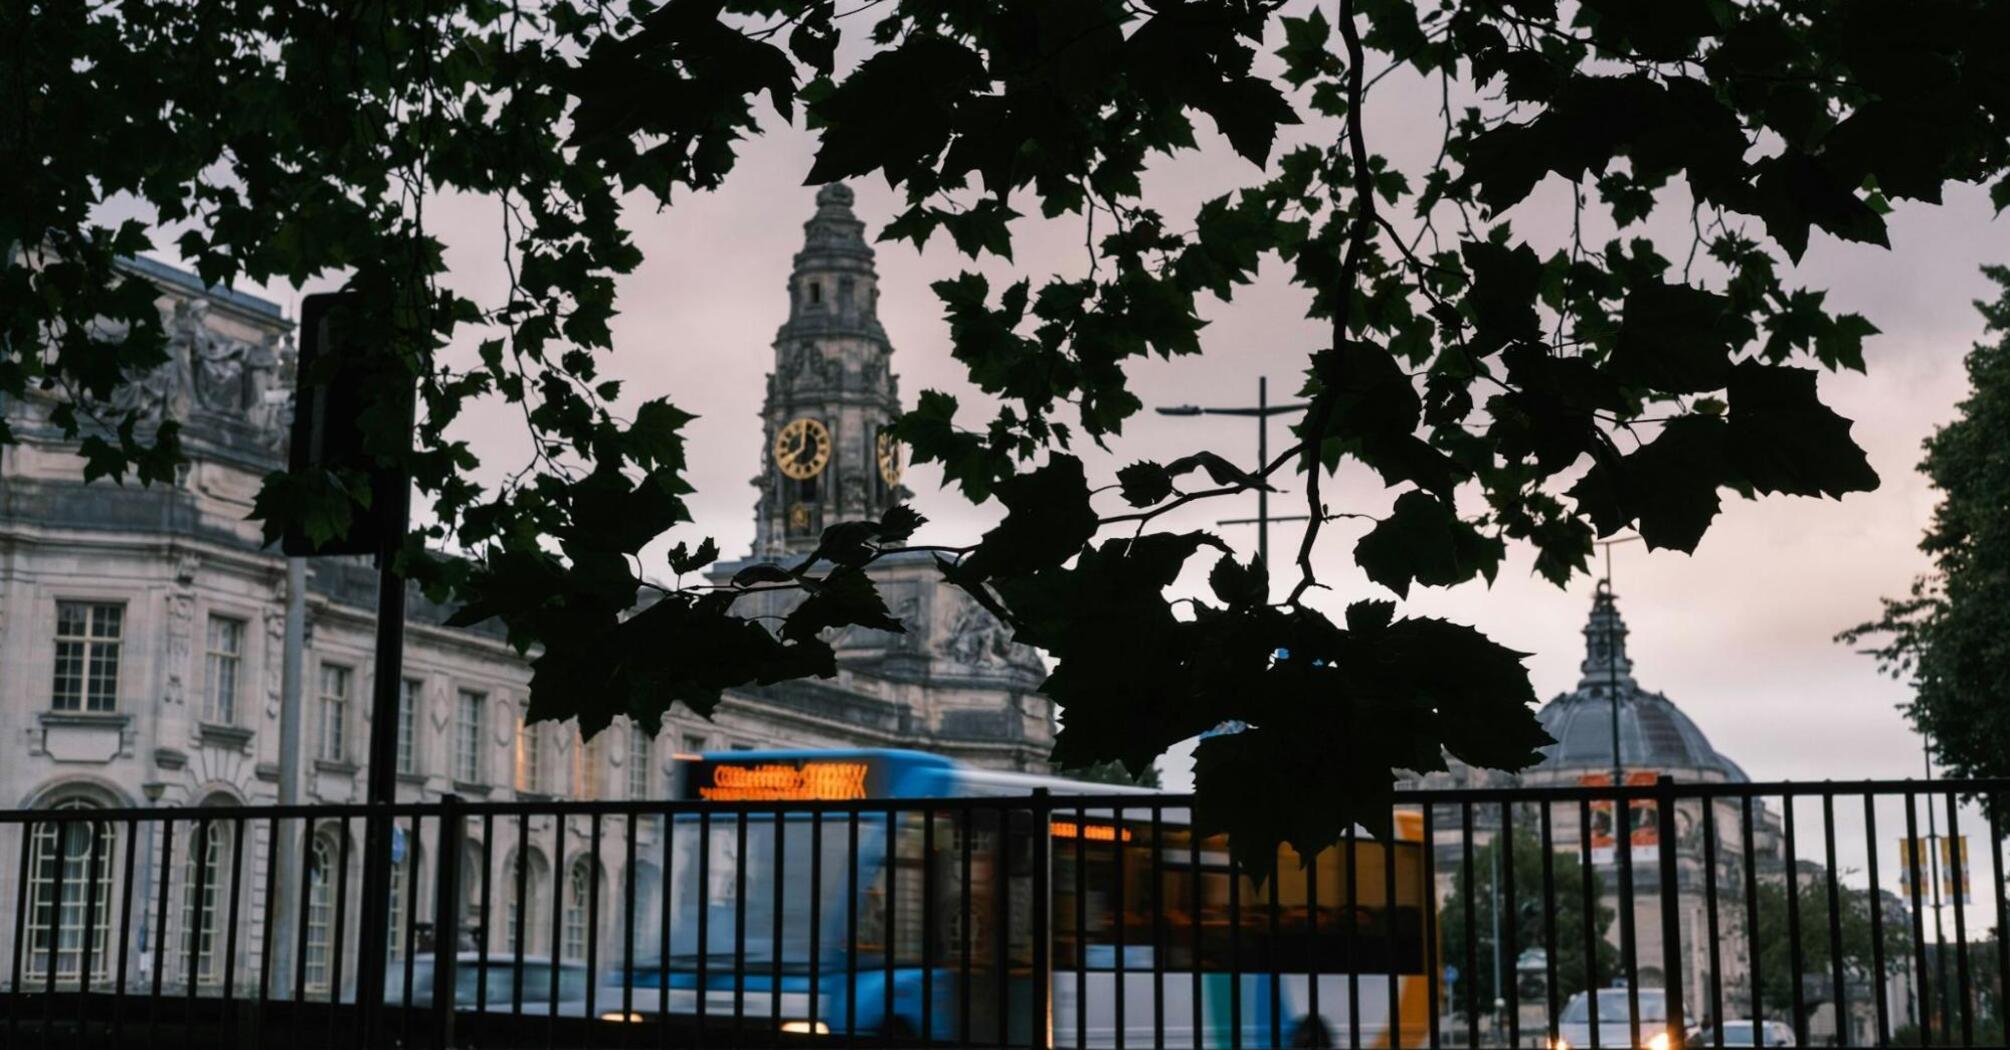 View of Cardiff's historic buildings through the leaves with a bus passing by